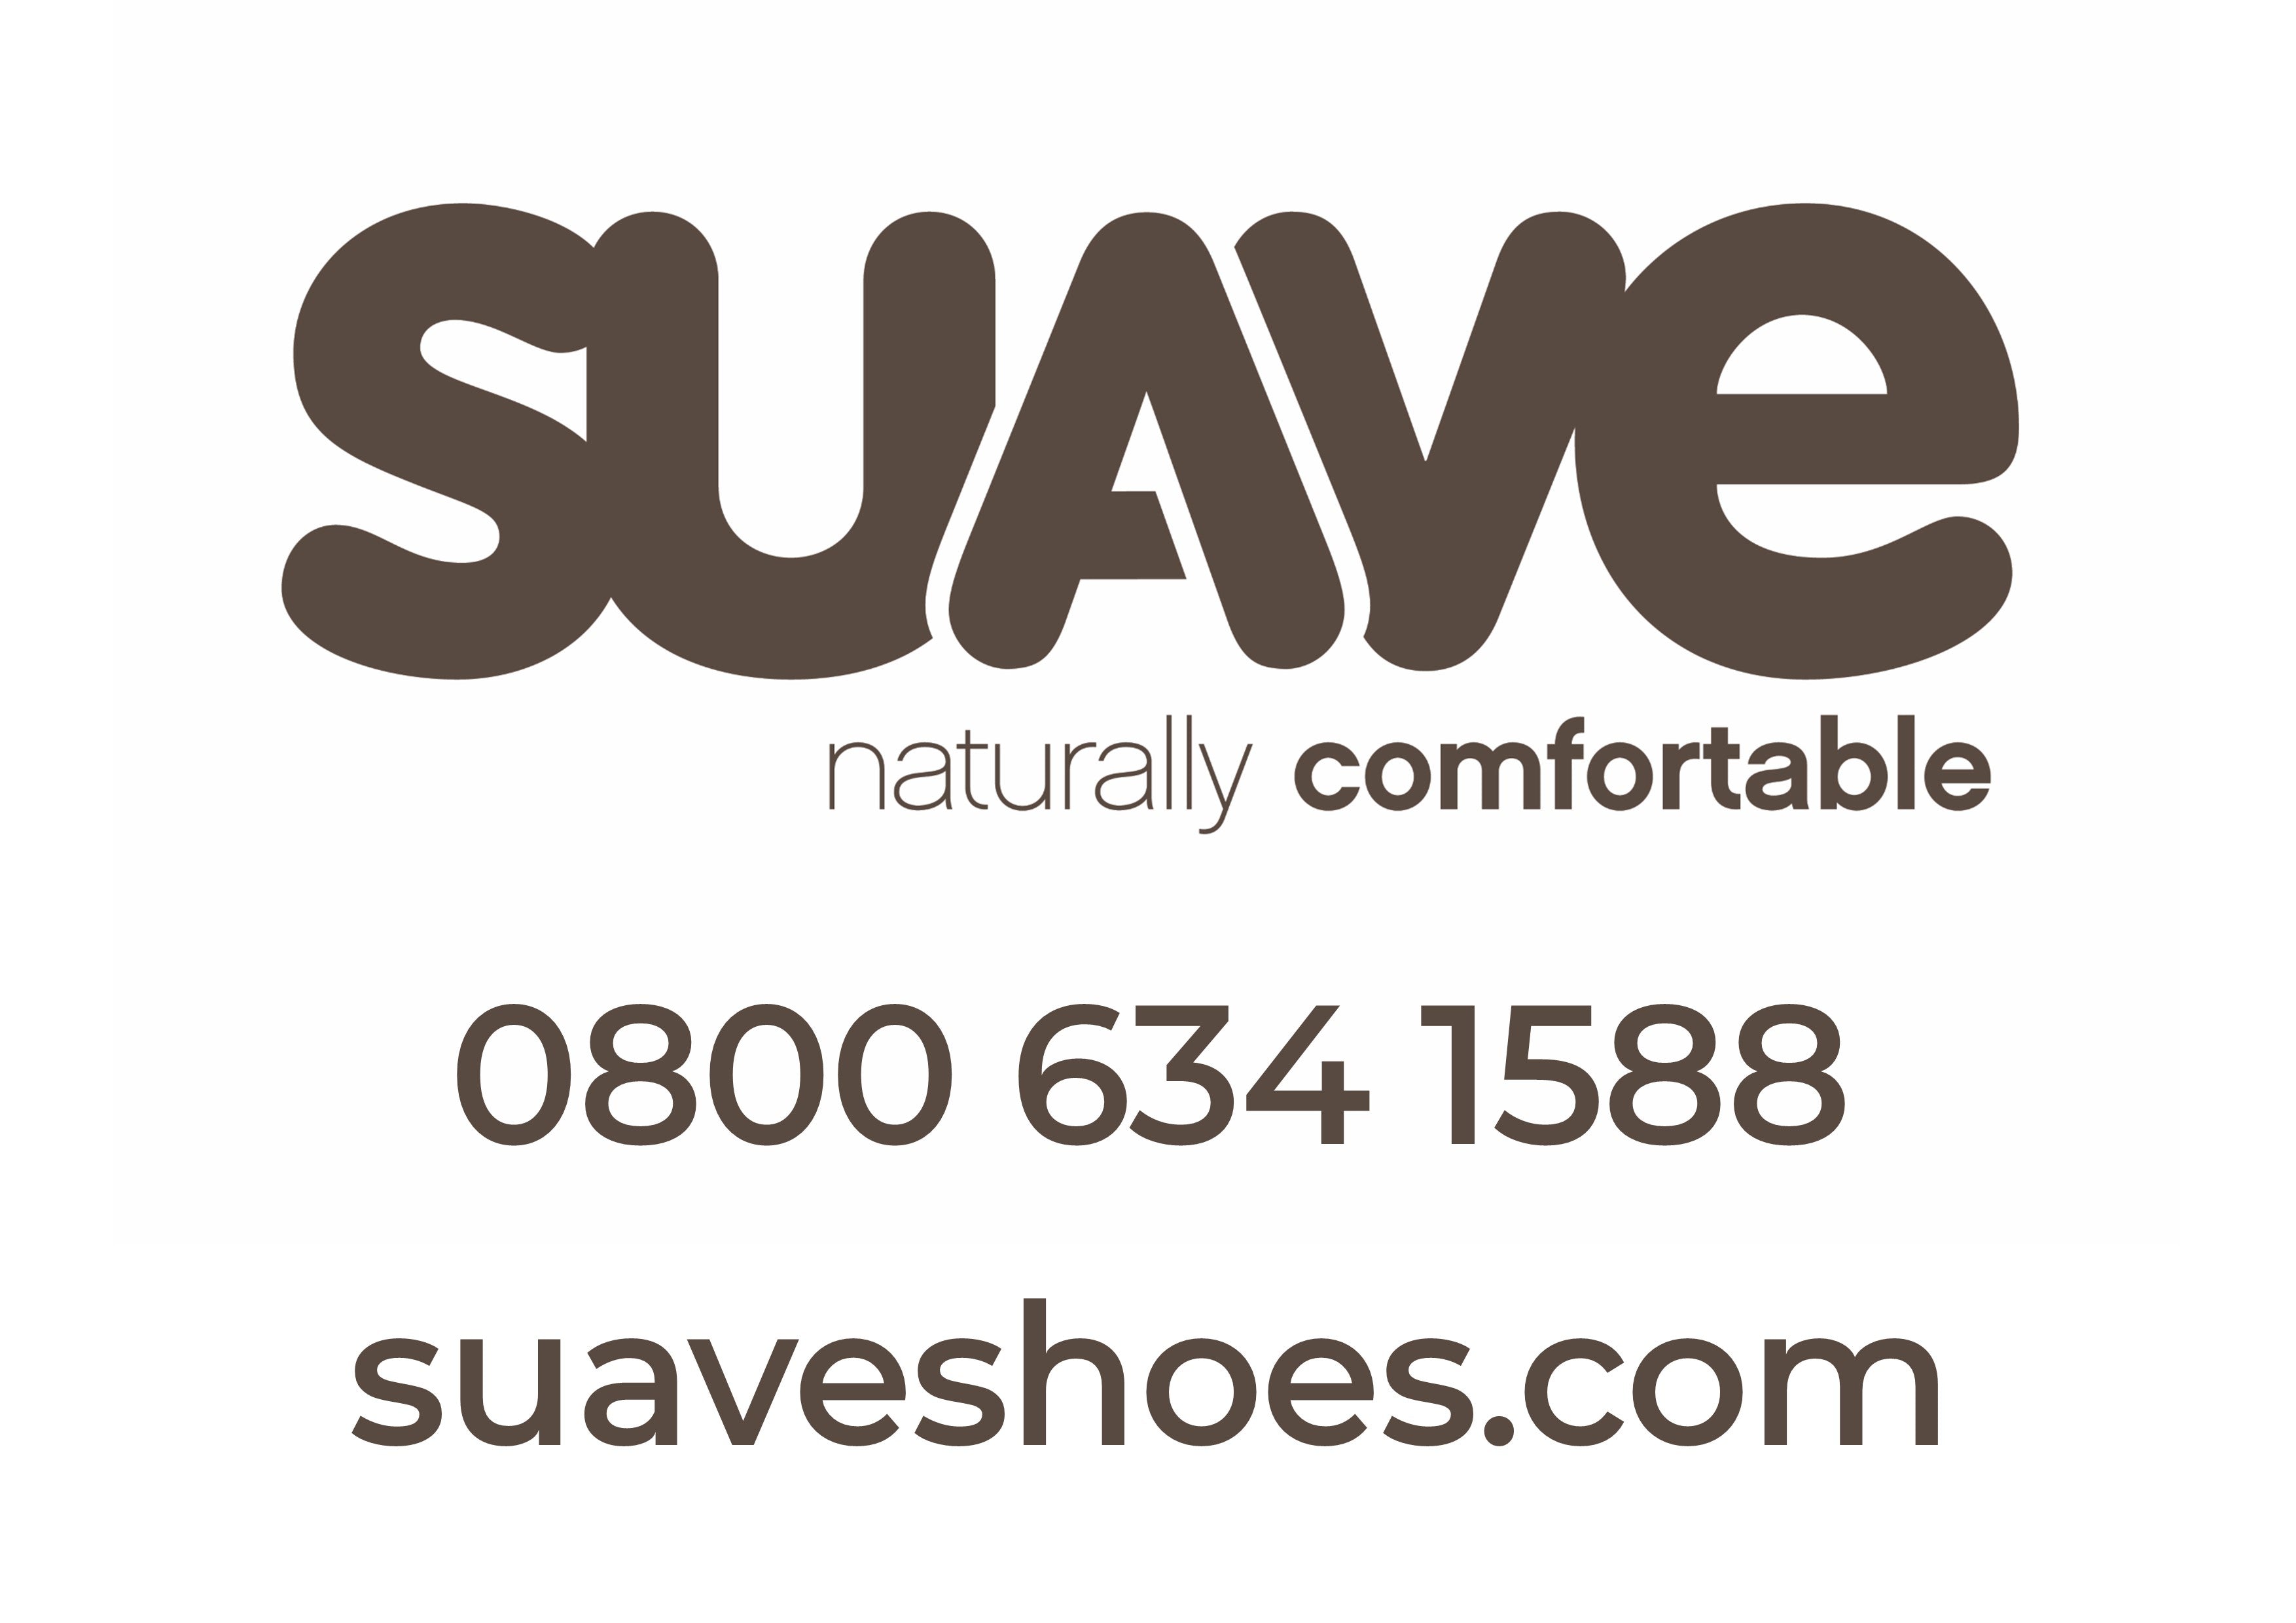 Suave Shoes | 0800 634 1588 | Naturally Comfortable